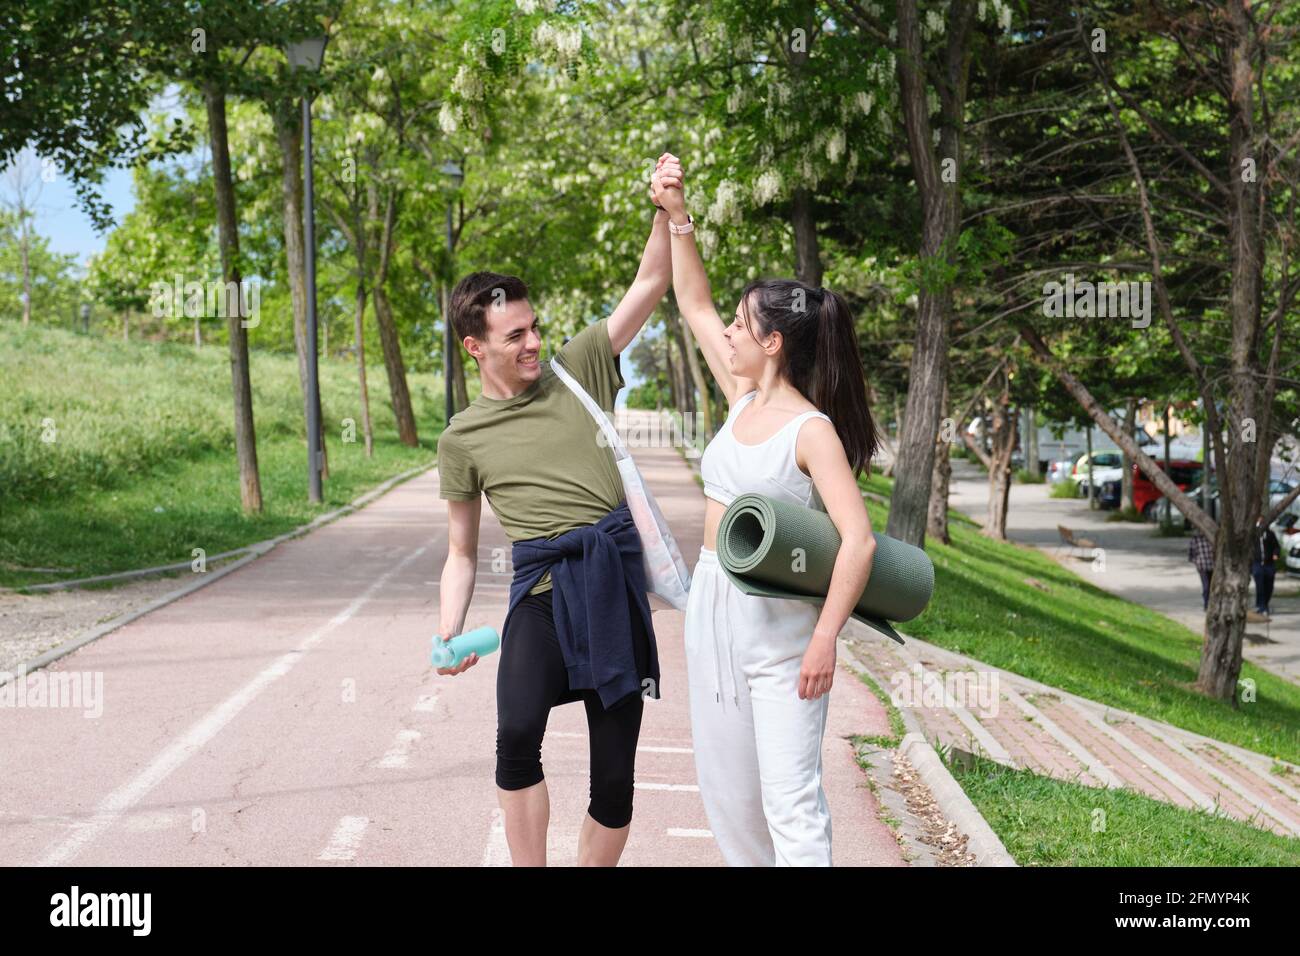 Young sport couple slapping hands in a 'high-five' and laughing. Fitness outside. Stock Photo